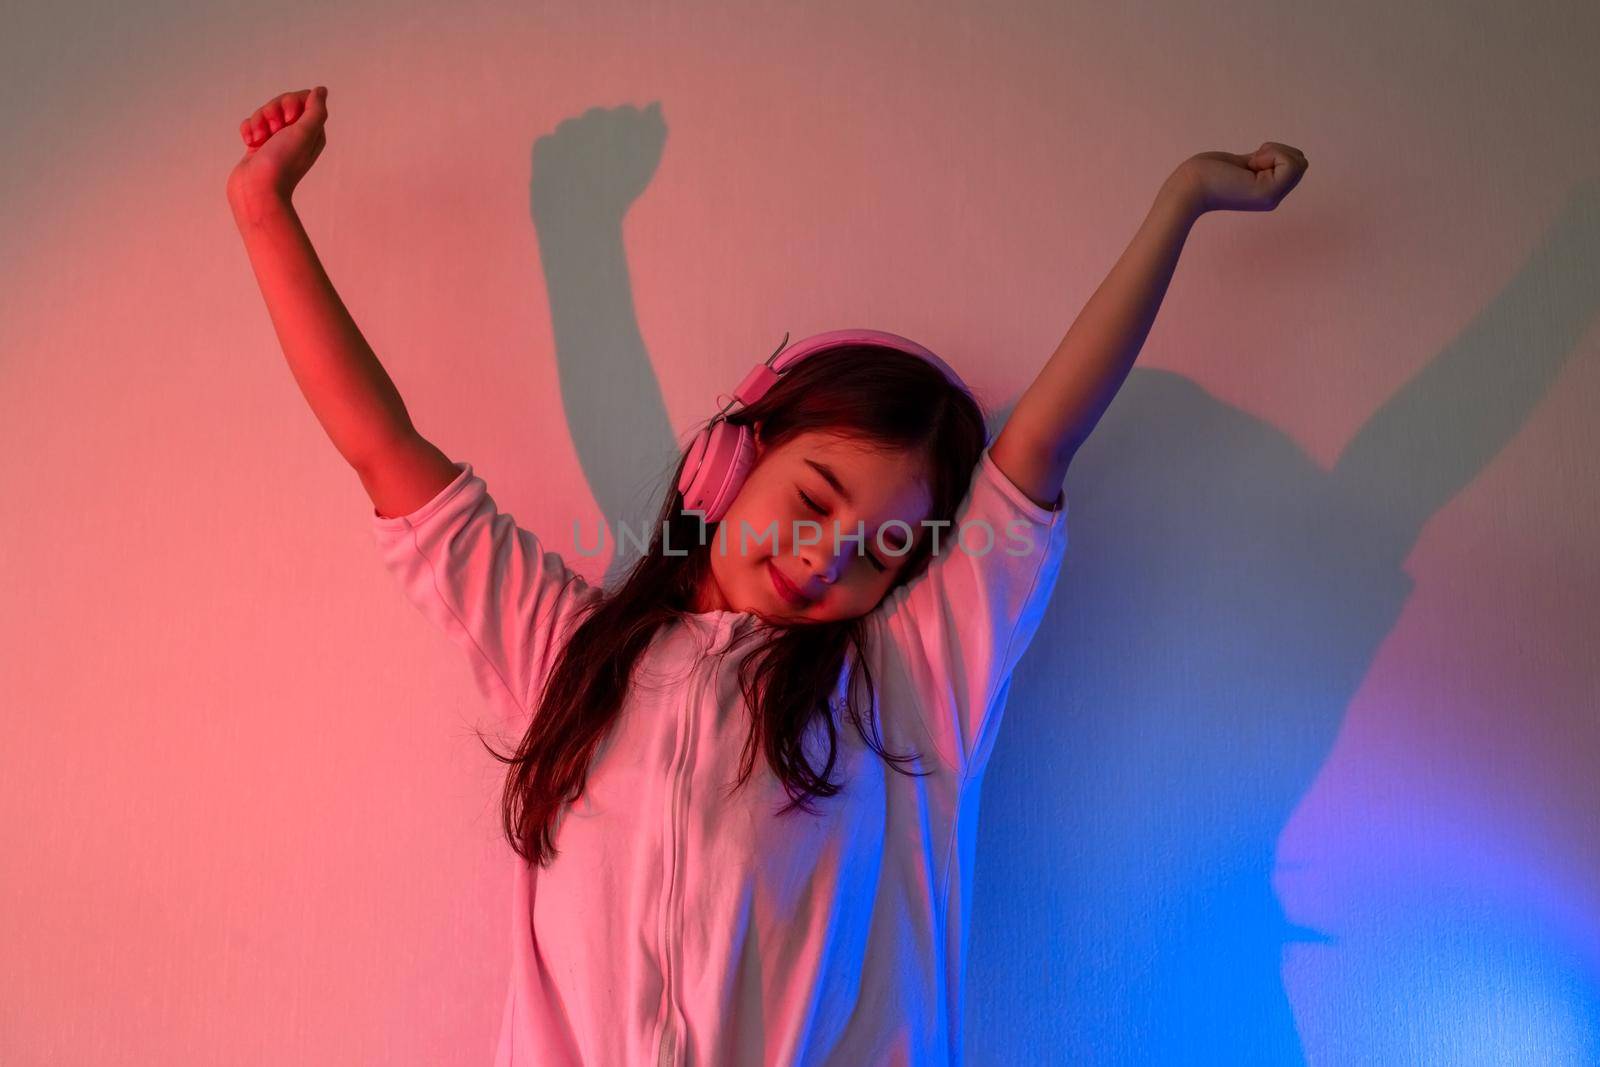 Dancing little girl in pink headphones with loose dark hair in neon pink and blue light against the wall, raised her hands up and closed her eyes